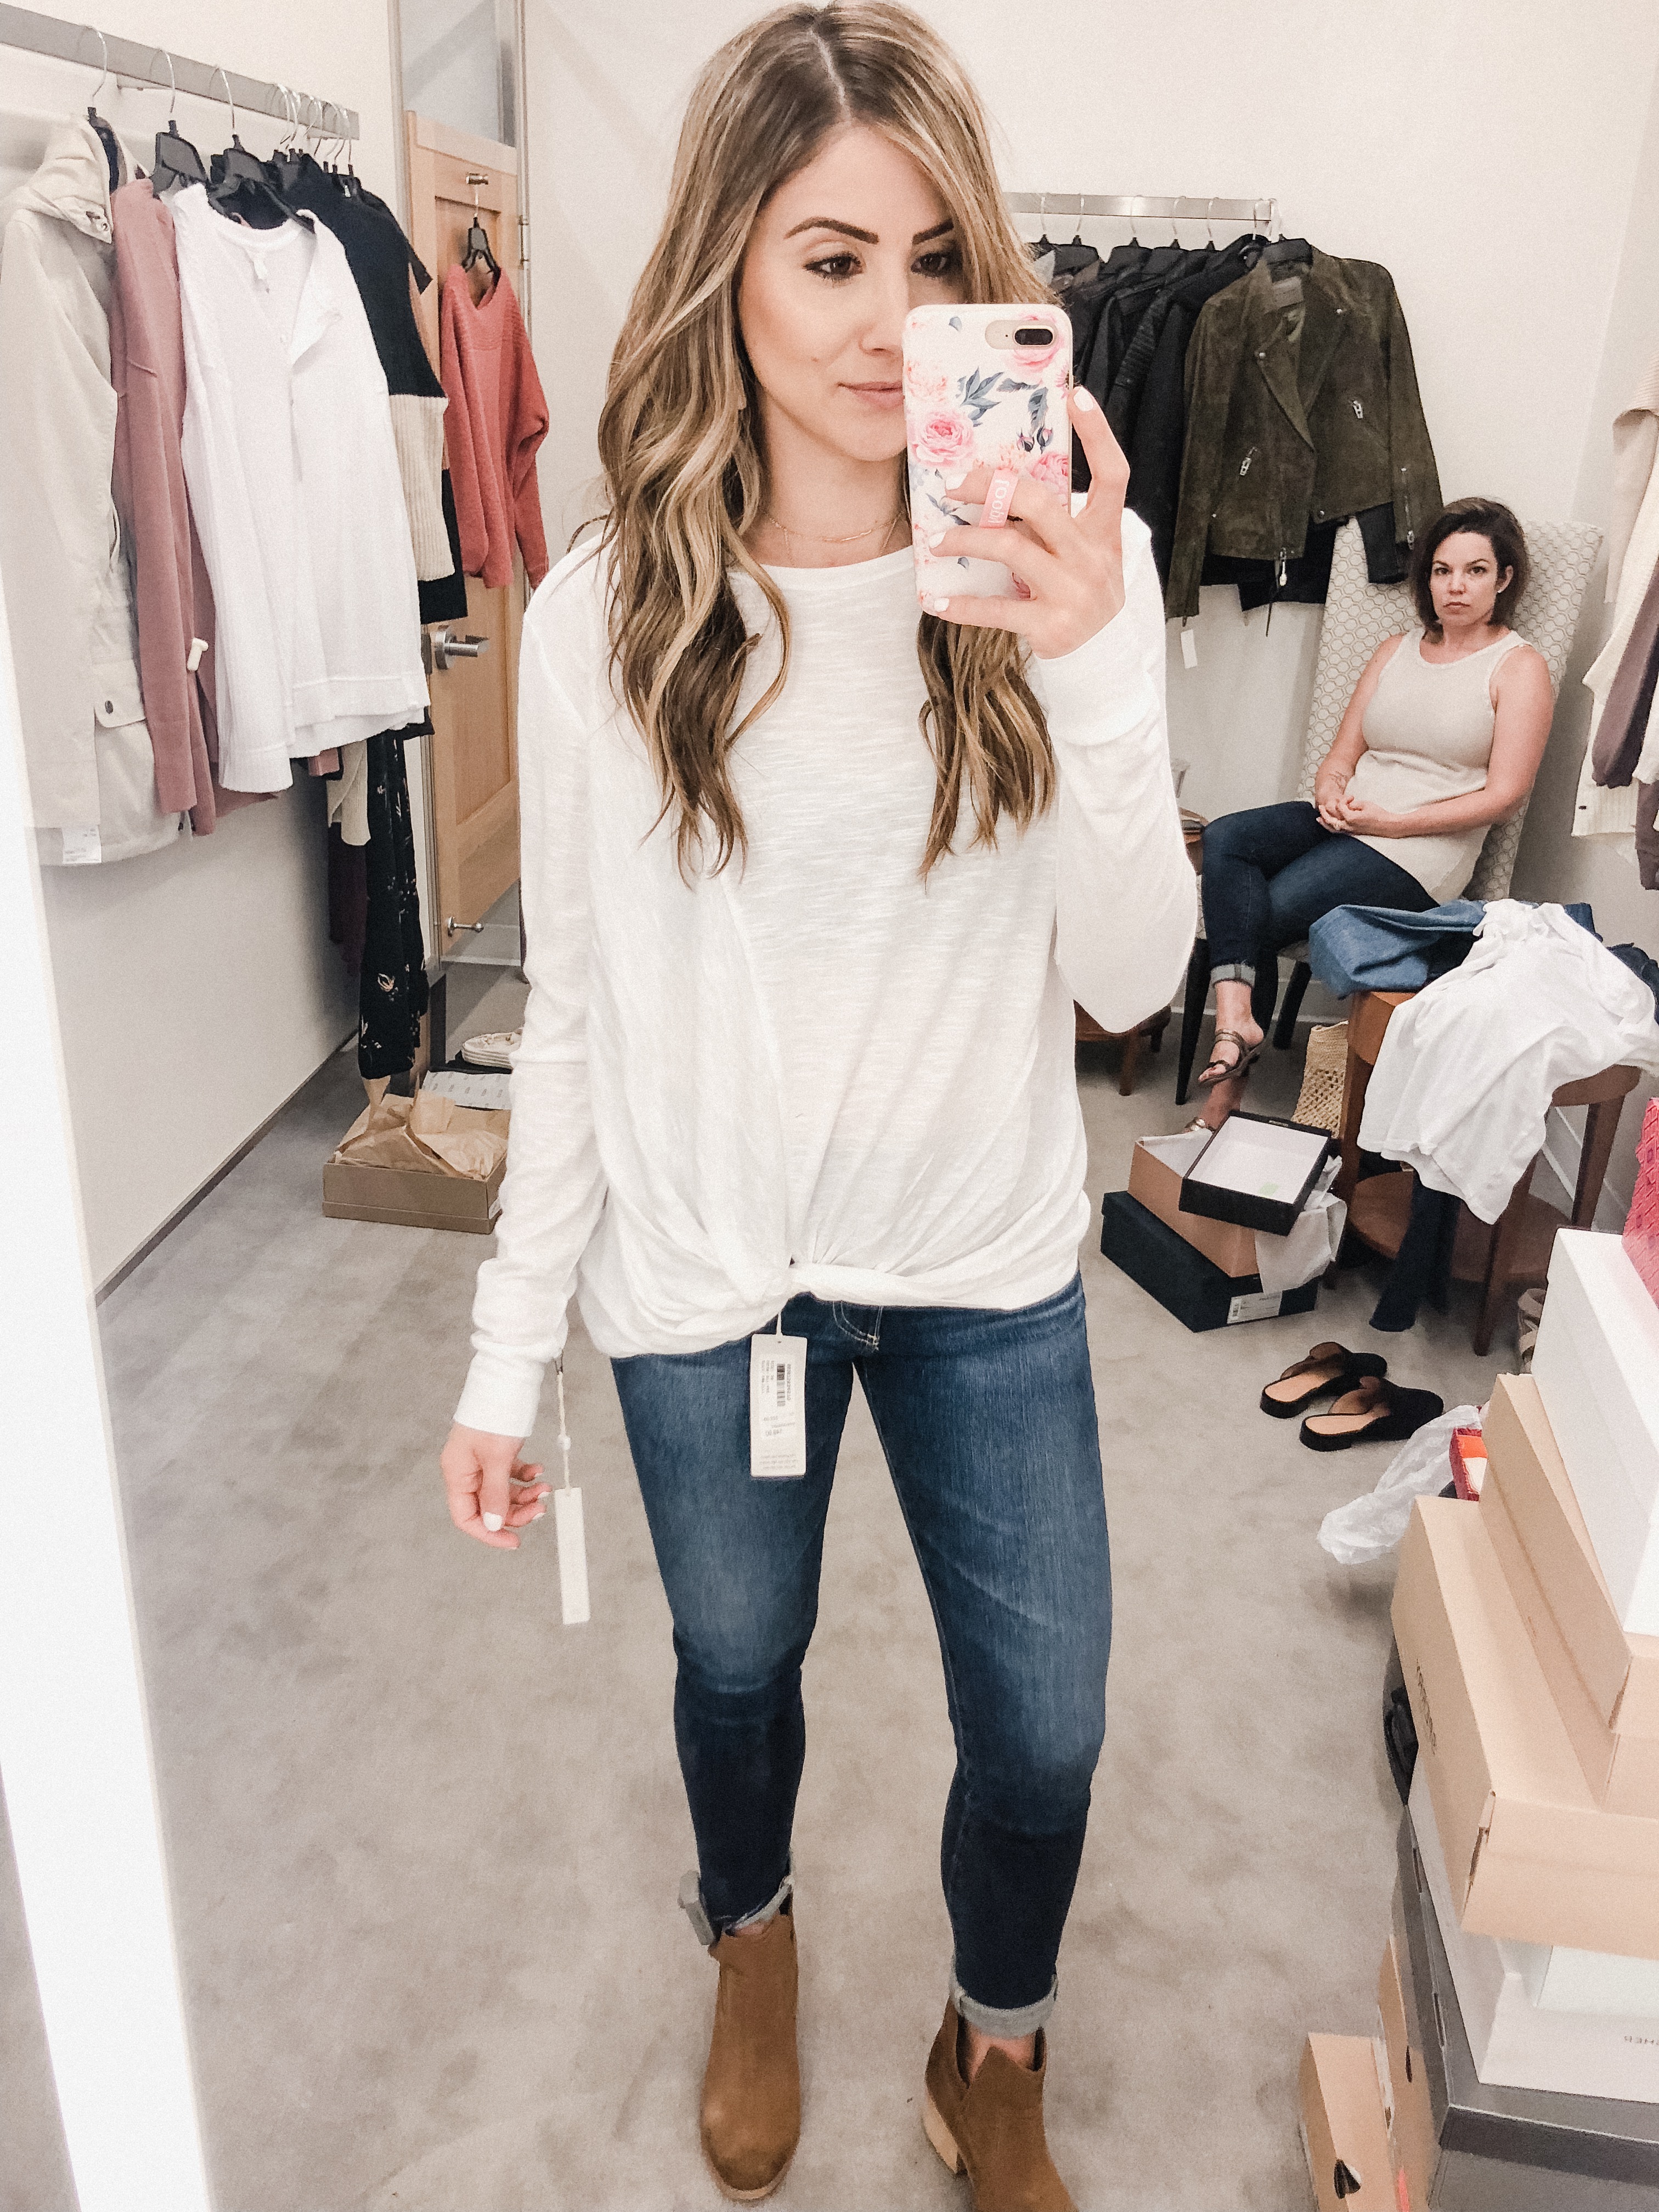 Life and style blogger Lauren McBride shares her fitting room try-on session for the Nordstrom Anniversary Sale 2018.